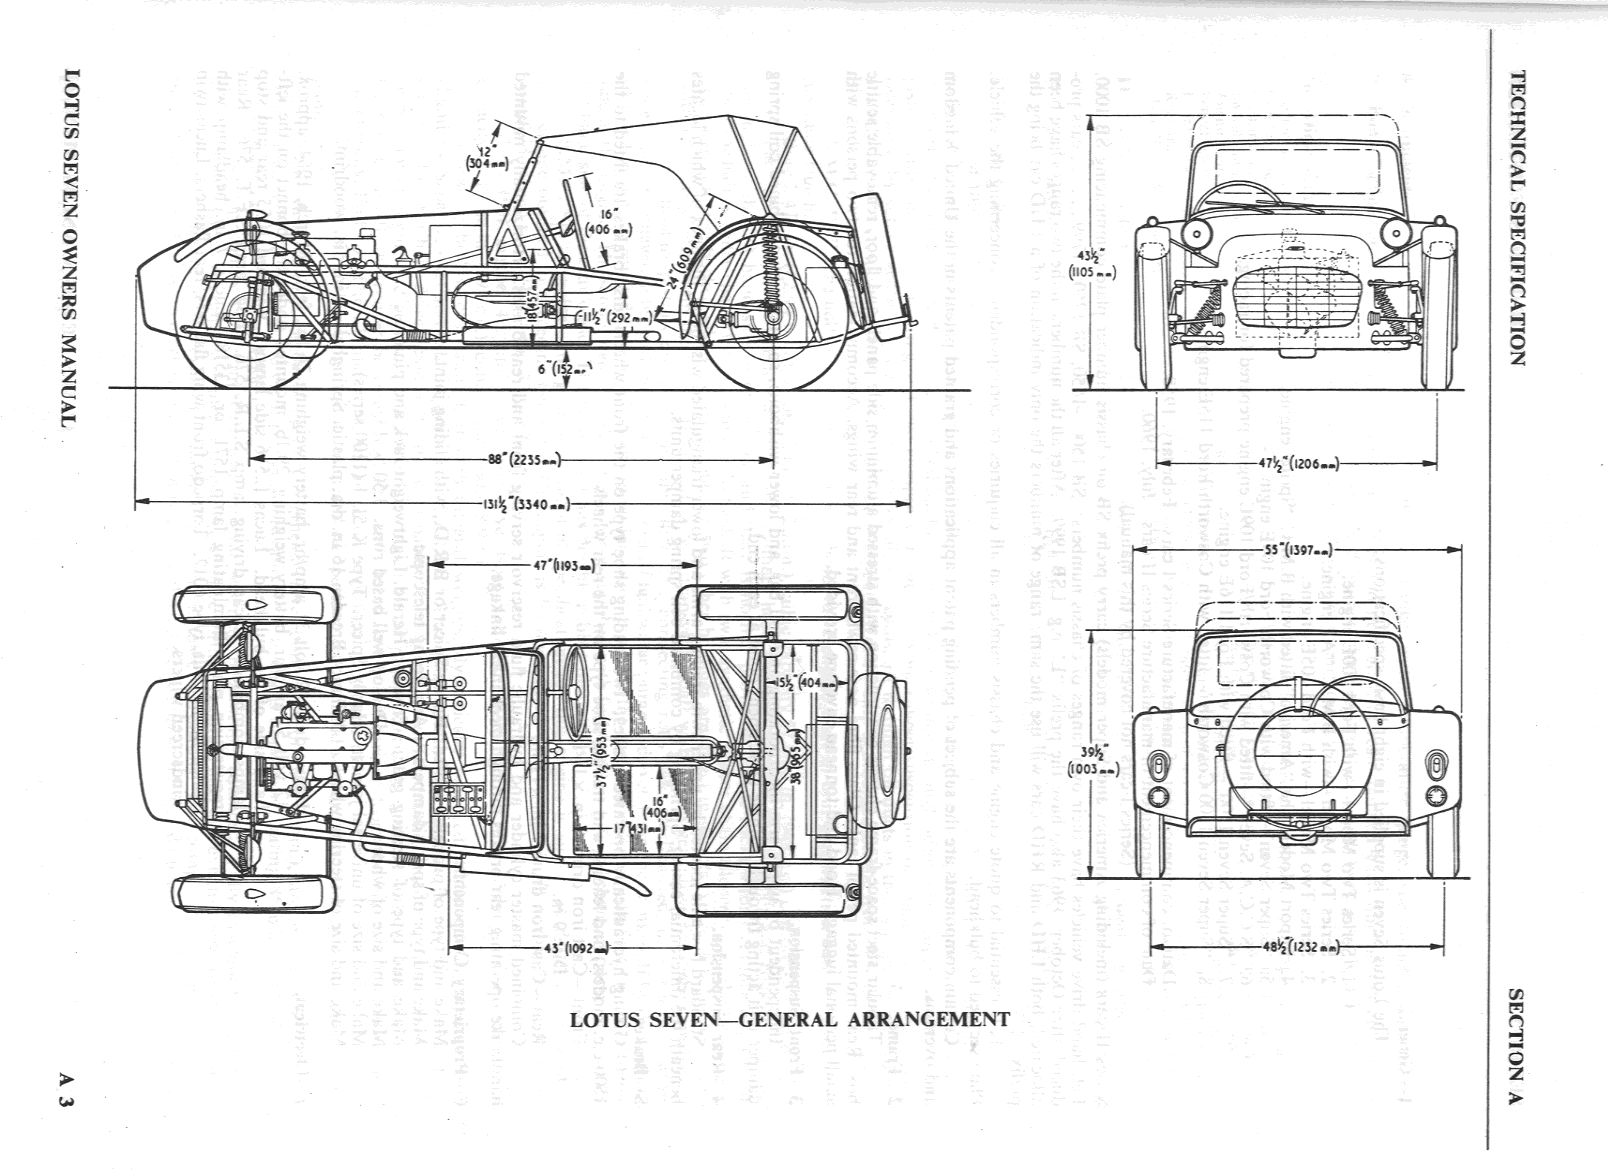 My Lotus Seven Blog is Back!! | Kyo's